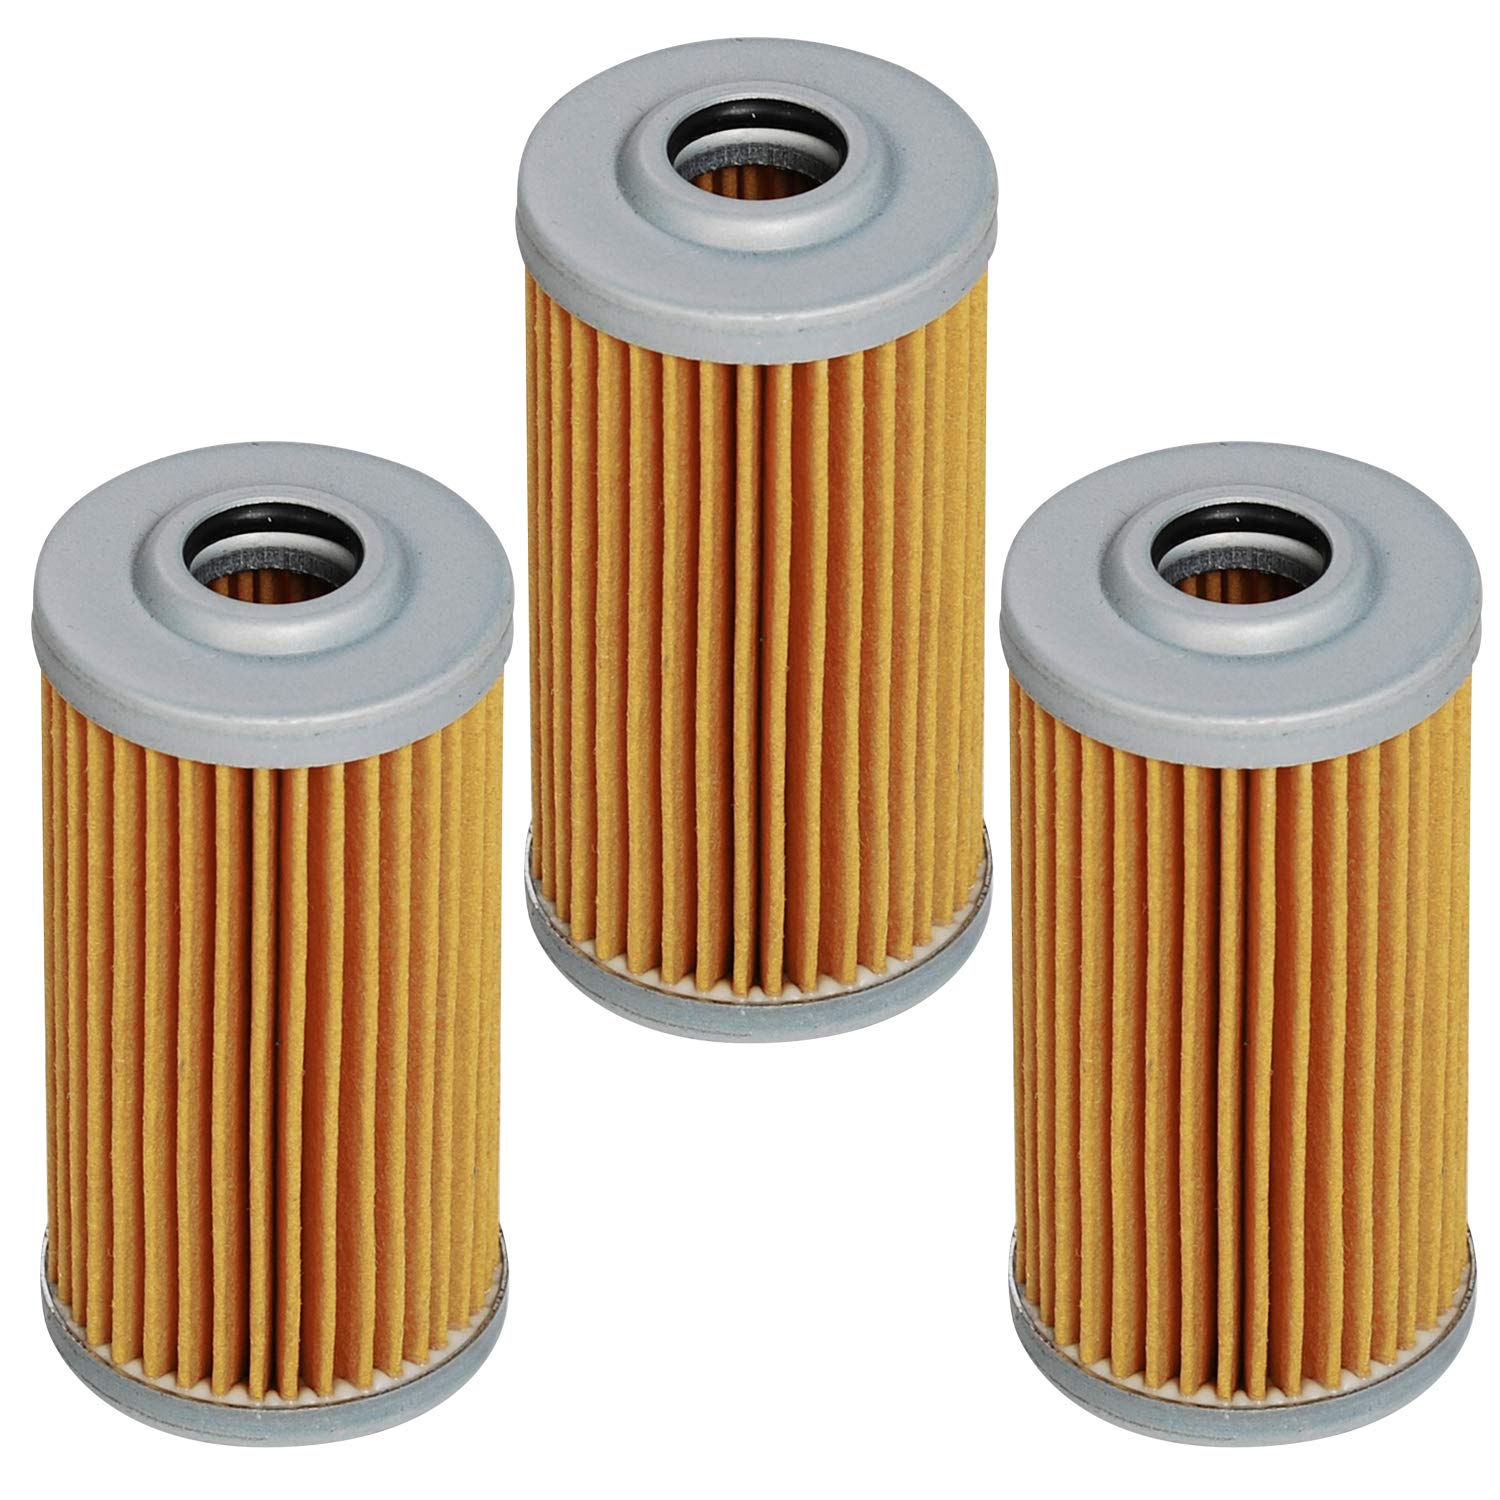 HIFROM Fuel Filter Compatible with Yanmar TS105 TS130 1GM 2GM 3GM 2QM 2YM 3YM 3GT 3HM SB12 YSB8 YSB12 YSM87 YSM12 Motor Engine 104500-55710 24341-000440 18-79960 (Pack of 3) von hifrom